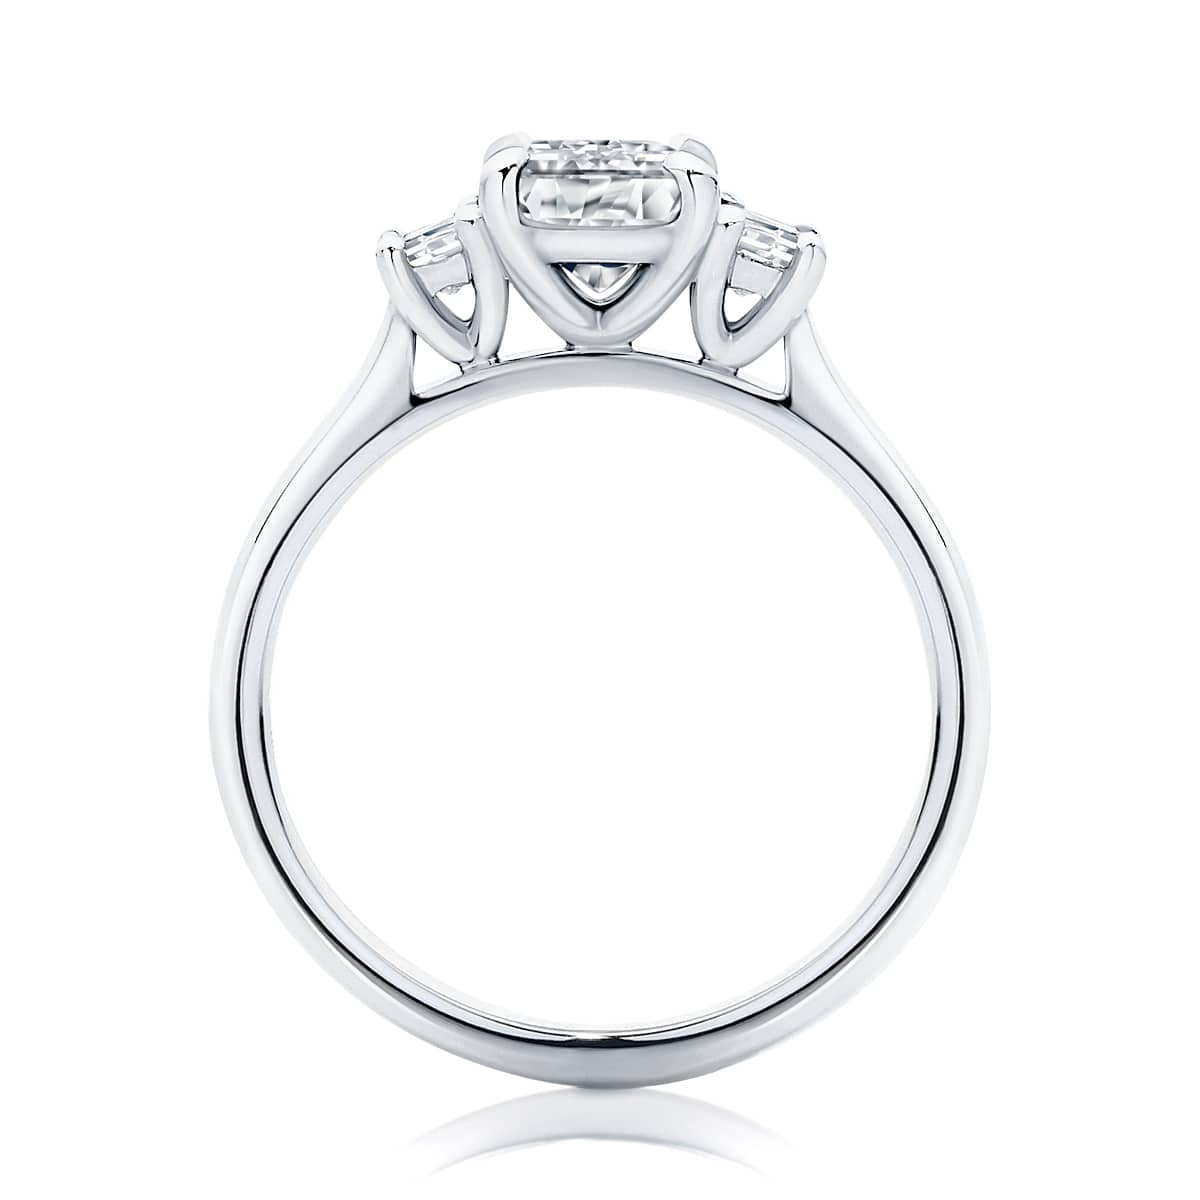 Soiree Emerald Cut and Trapezoid Diamond Engagement Ring in Platinum